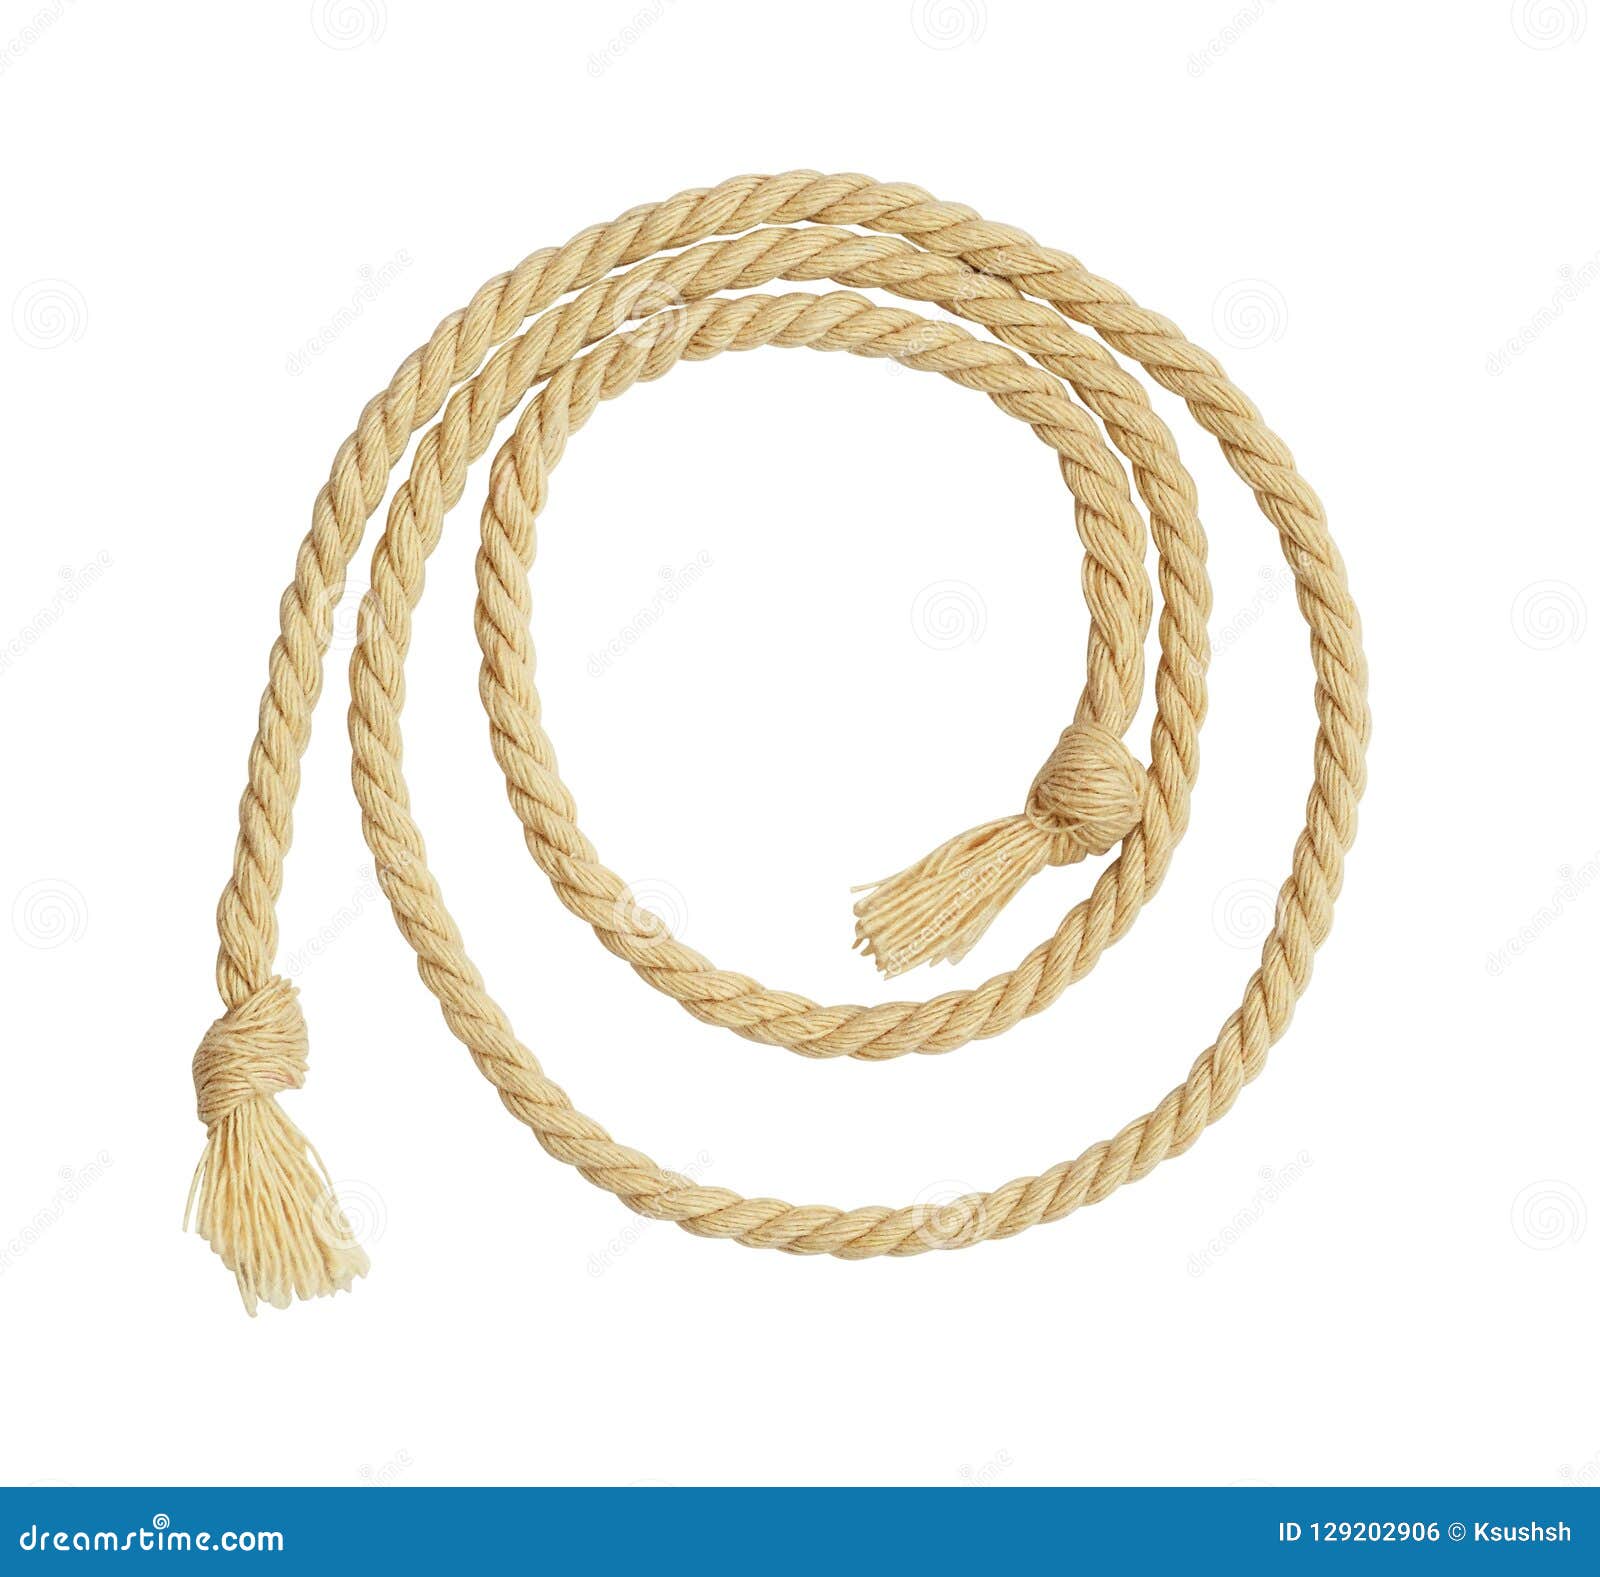 https://thumbs.dreamstime.com/z/beige-rope-round-frame-isolated-white-background-129202906.jpg